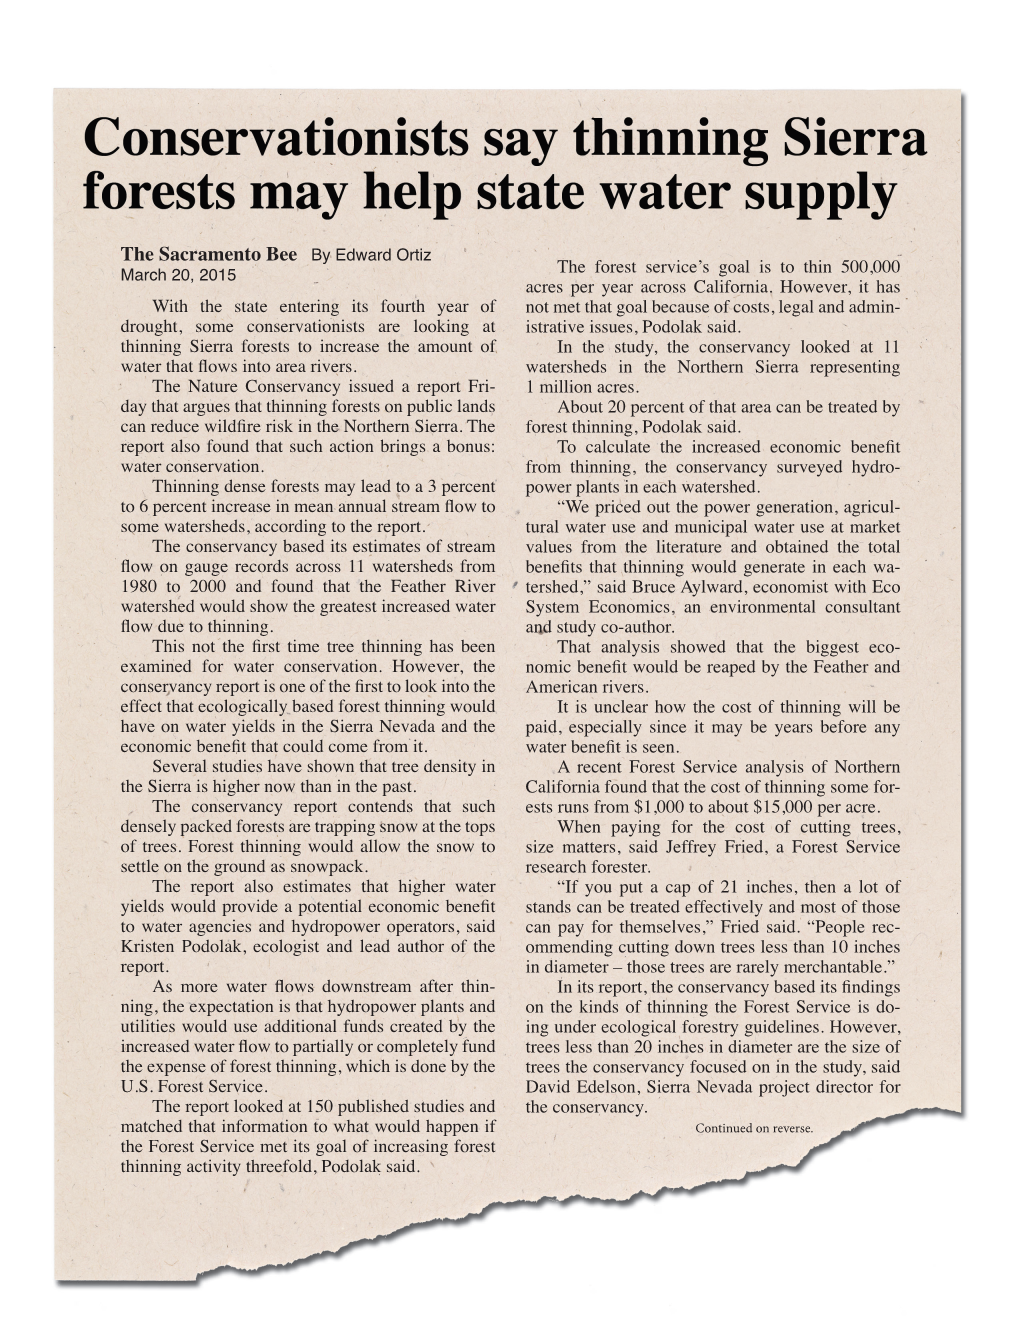 The Sacramento Bee by Edward Ortiz March 20, 2015 the Forest Service’S Goal Is to Thin 500,000 Acres Per Year Across California